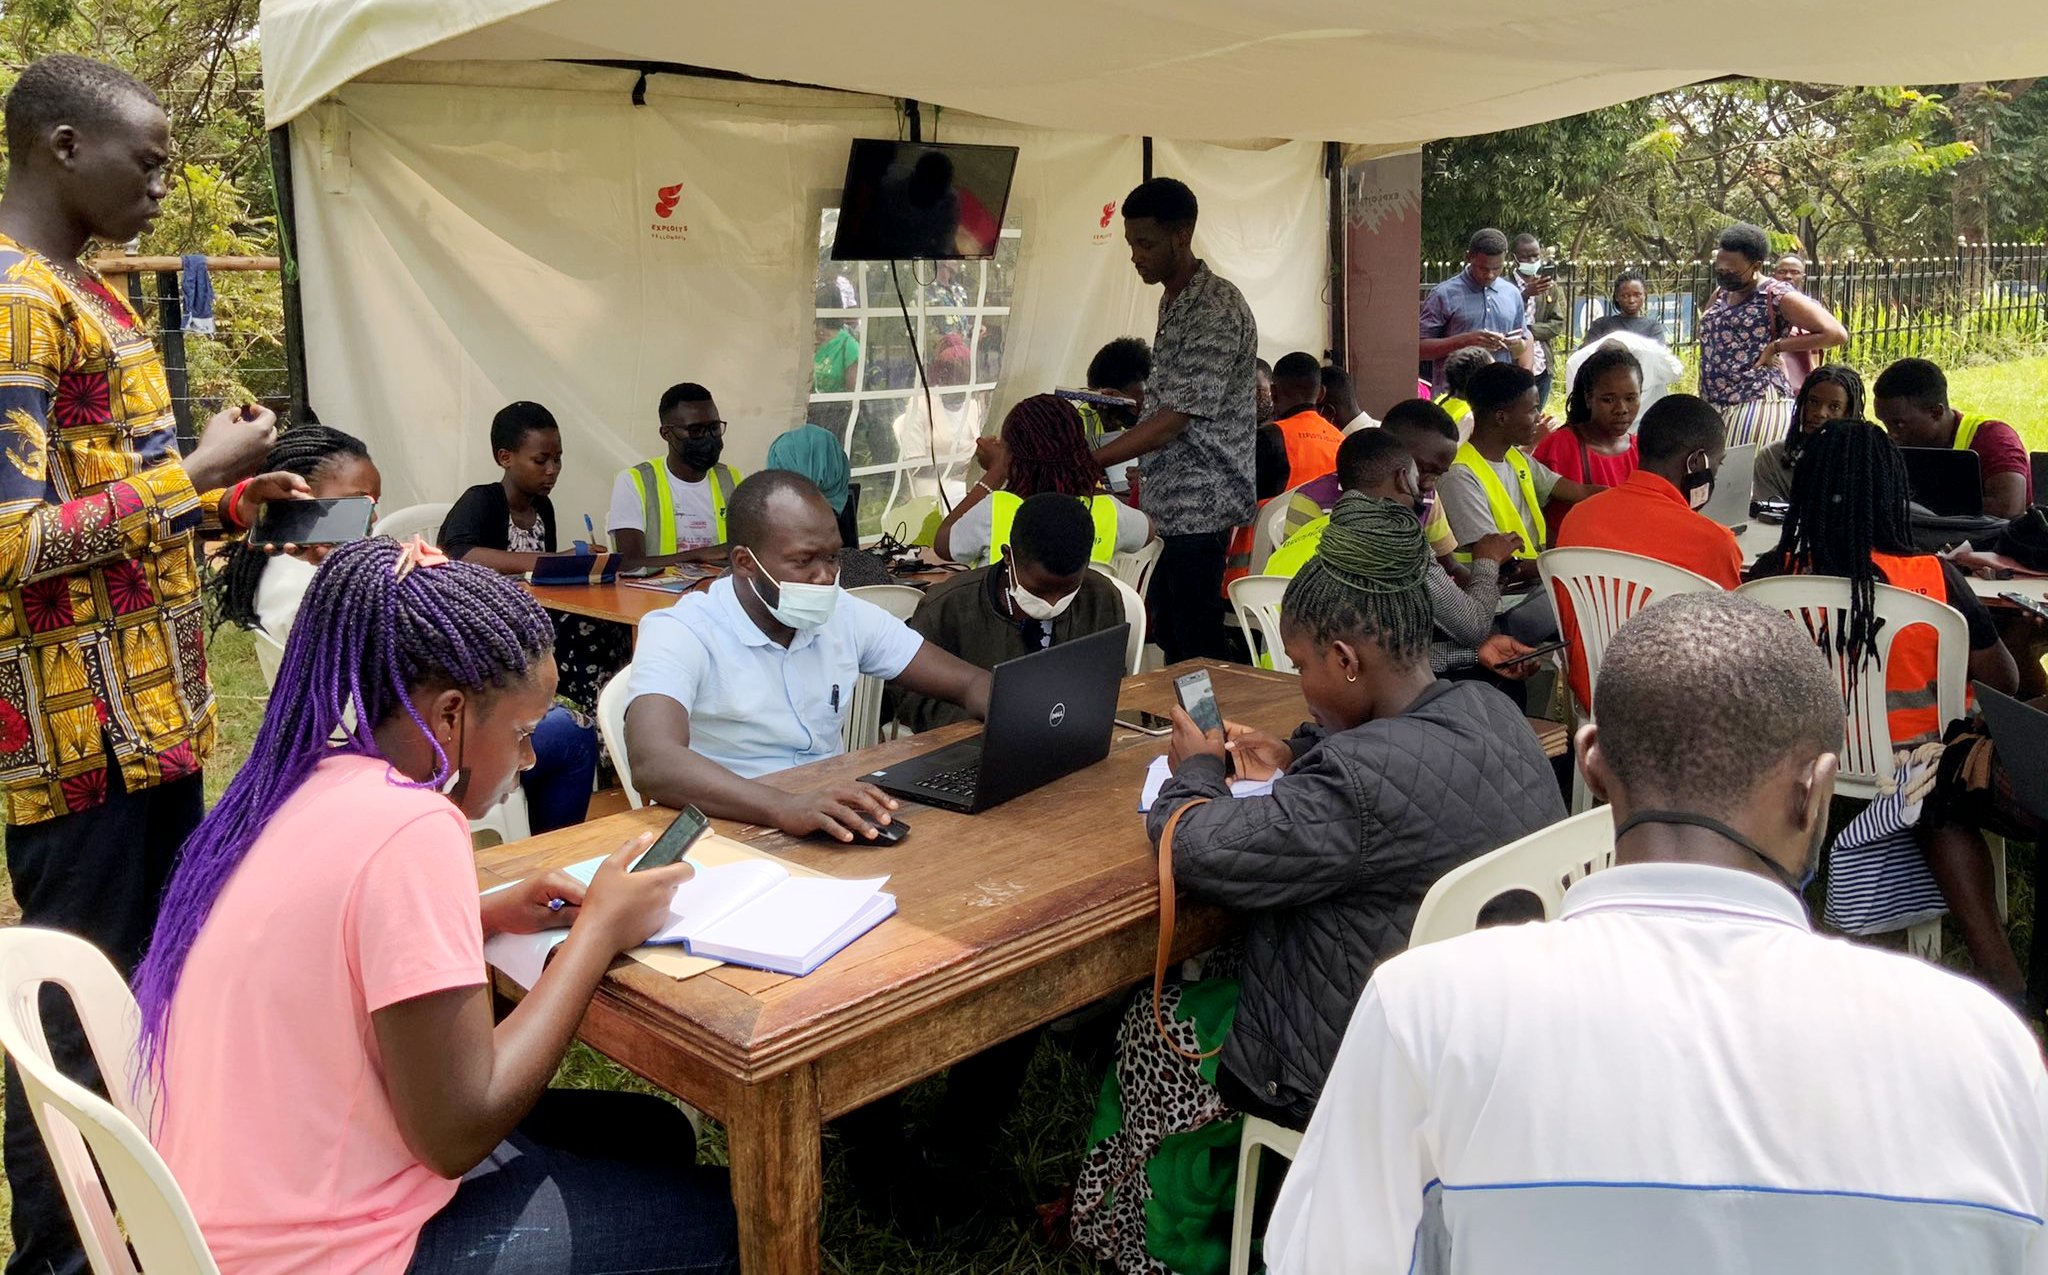 DICTS Staff are joined by volunteers to offer ICT Services to students at the Freedom Square, Makerere University on 25th February 2022.